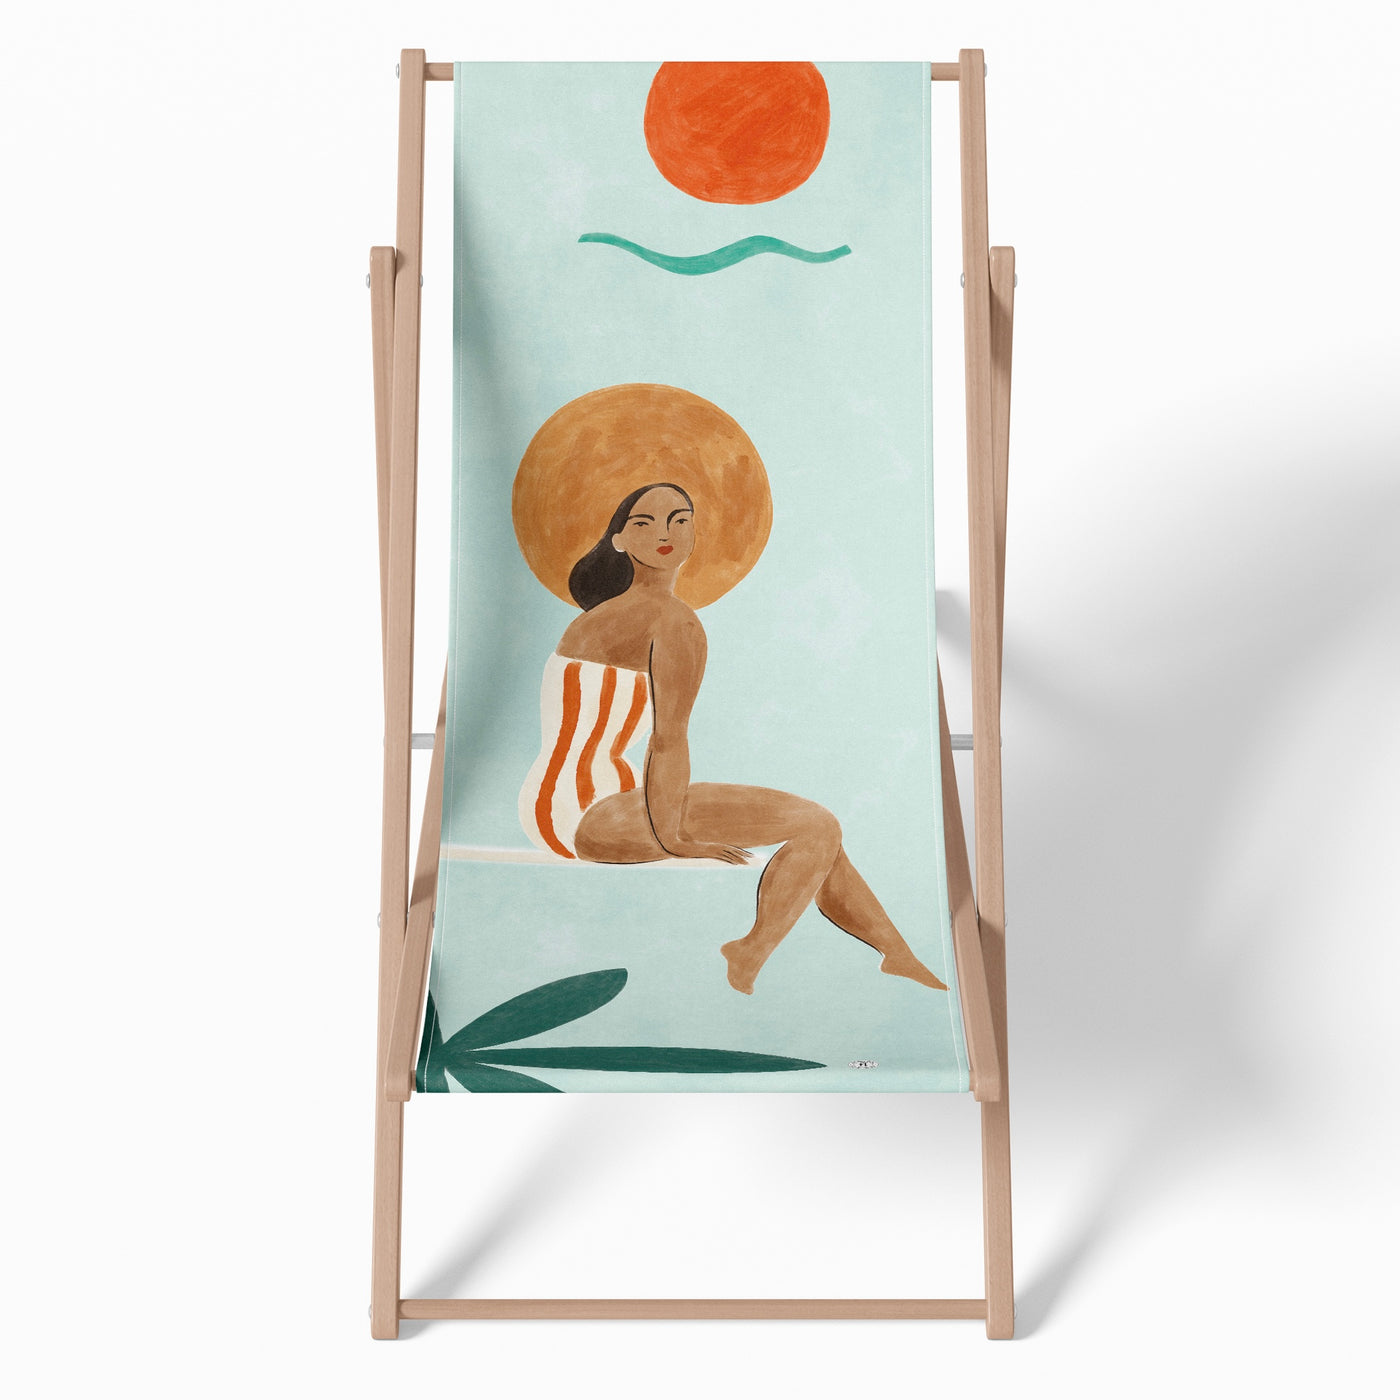 Lounge chair Ramatuelle (SHIPPING ON REQUEST ONLY)